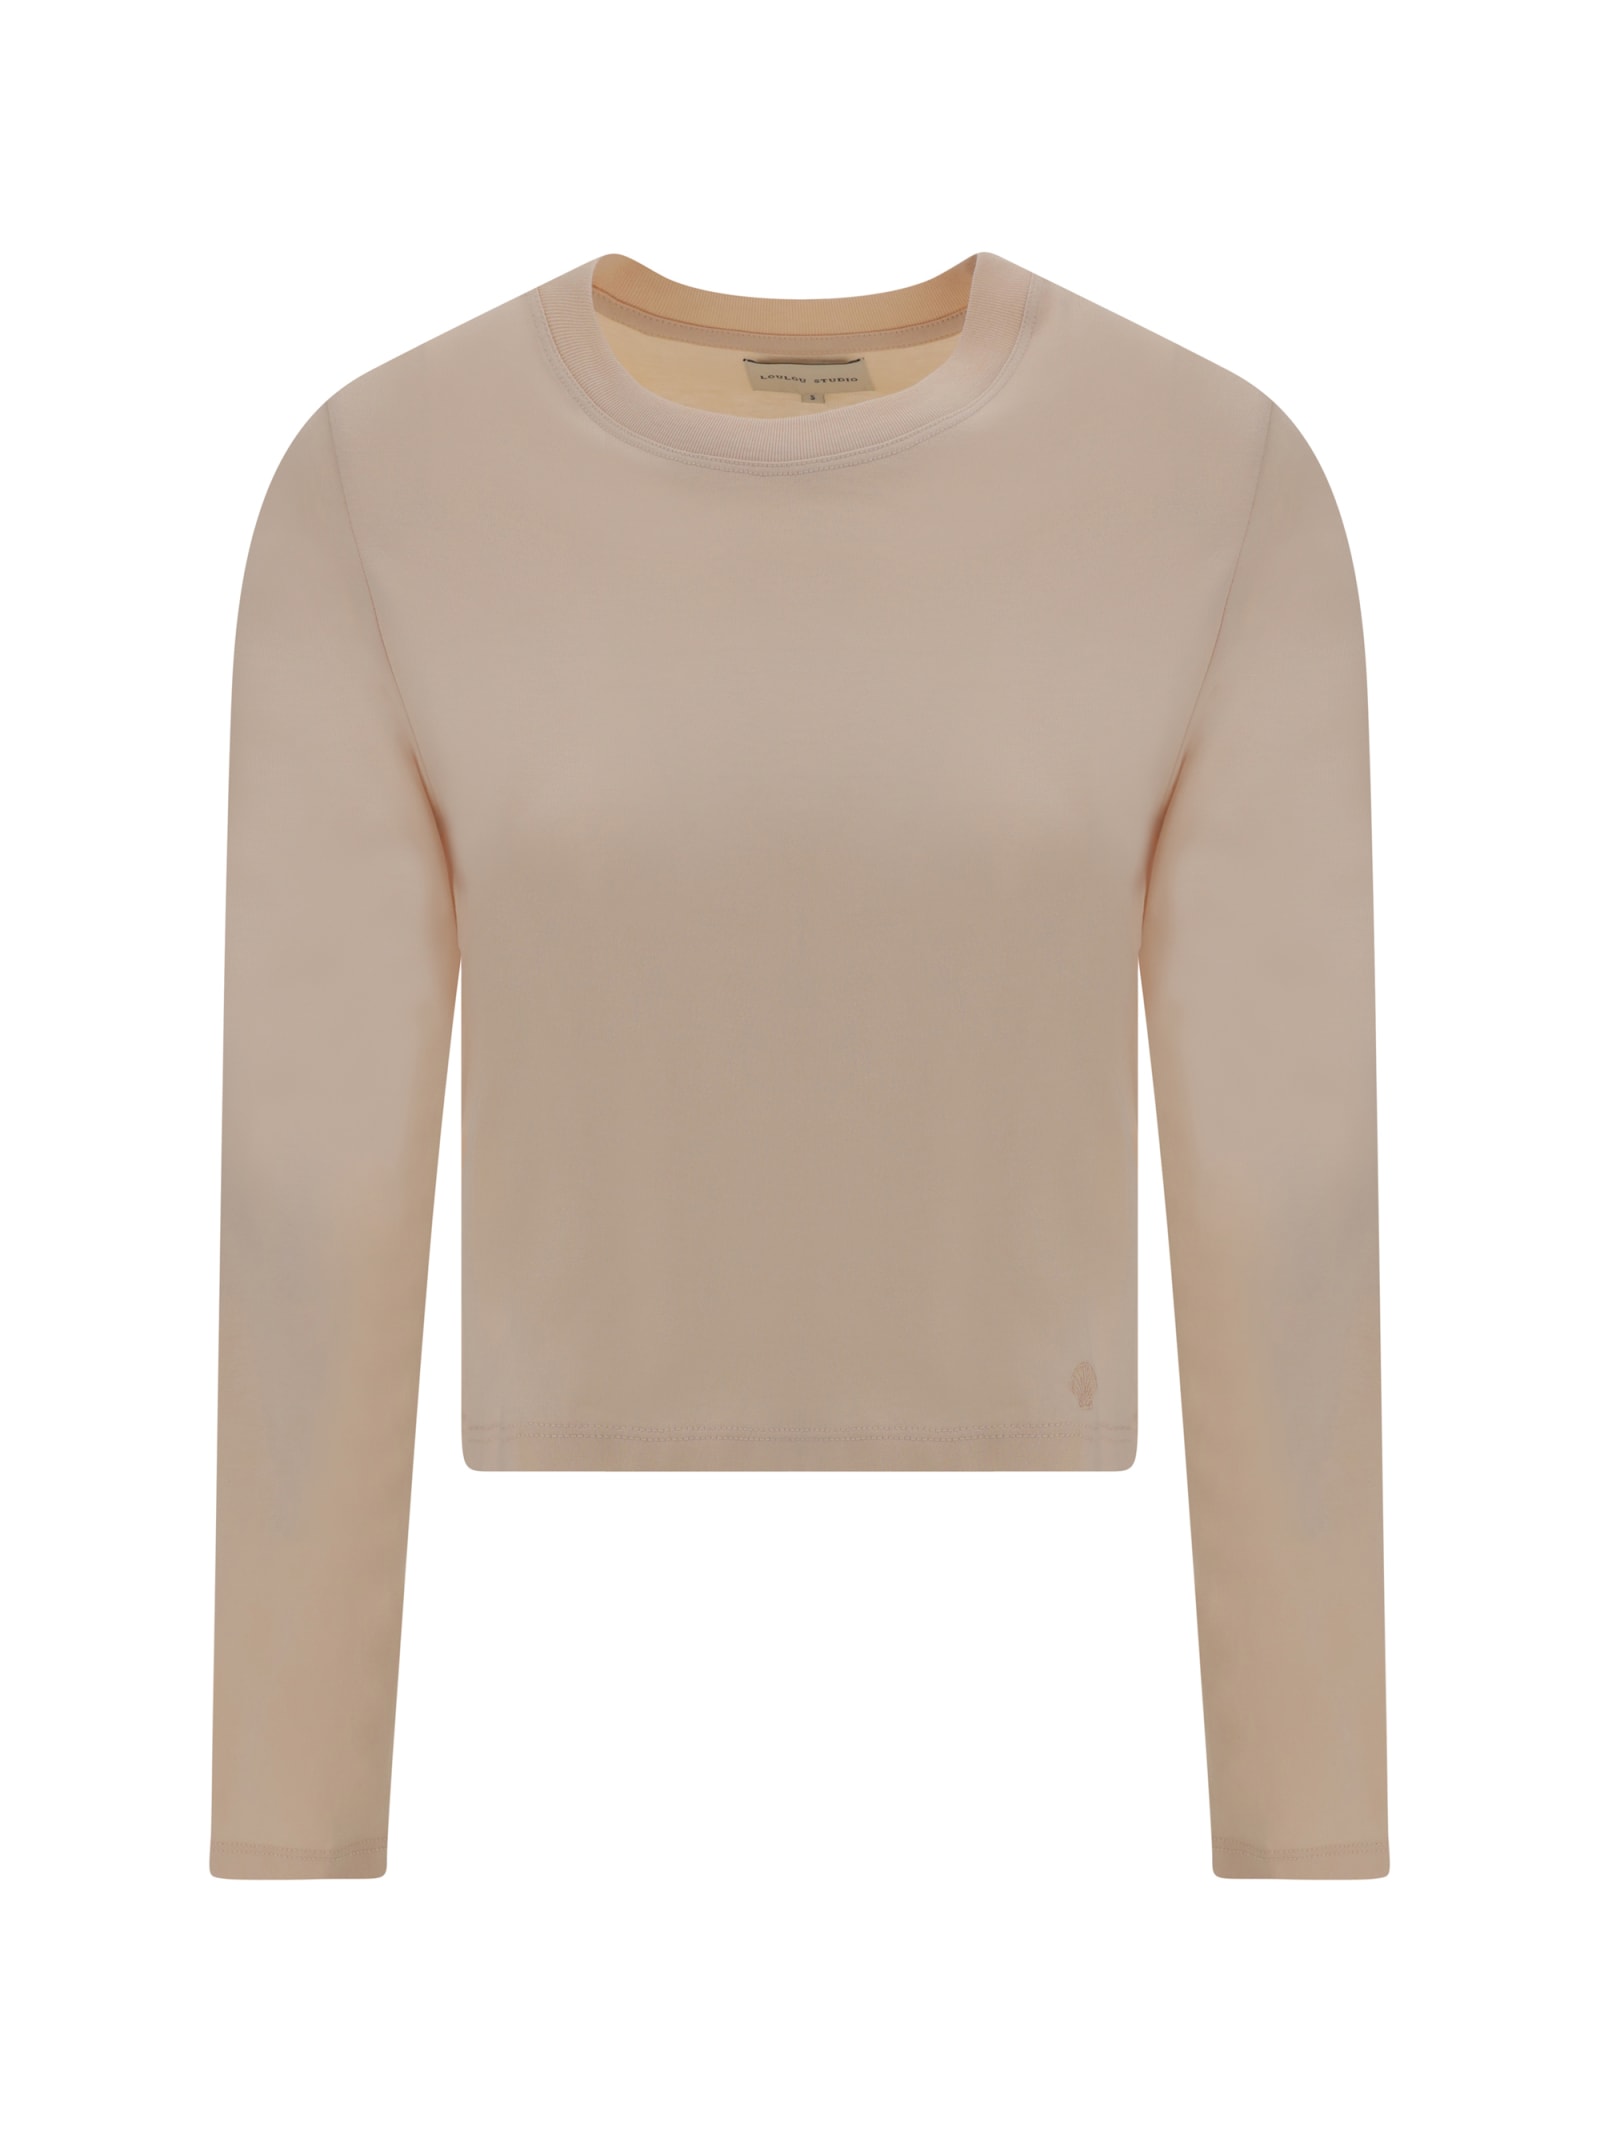 Shop Loulou Studio Long Sleeve Jersey In Cream Rose